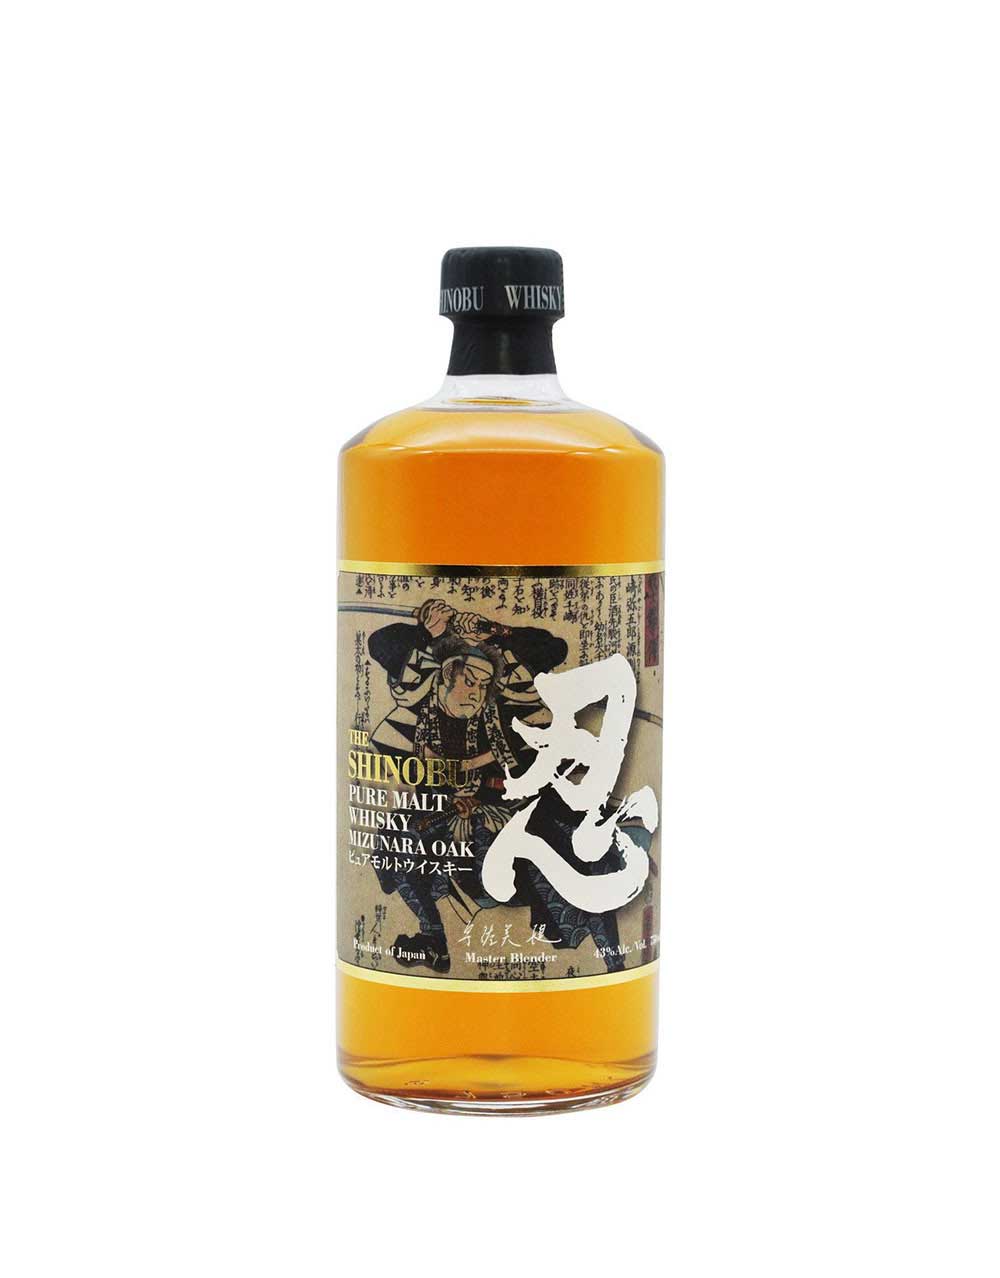 Lucky Seven 'The Hold Up' 12 Year Old Bourbon